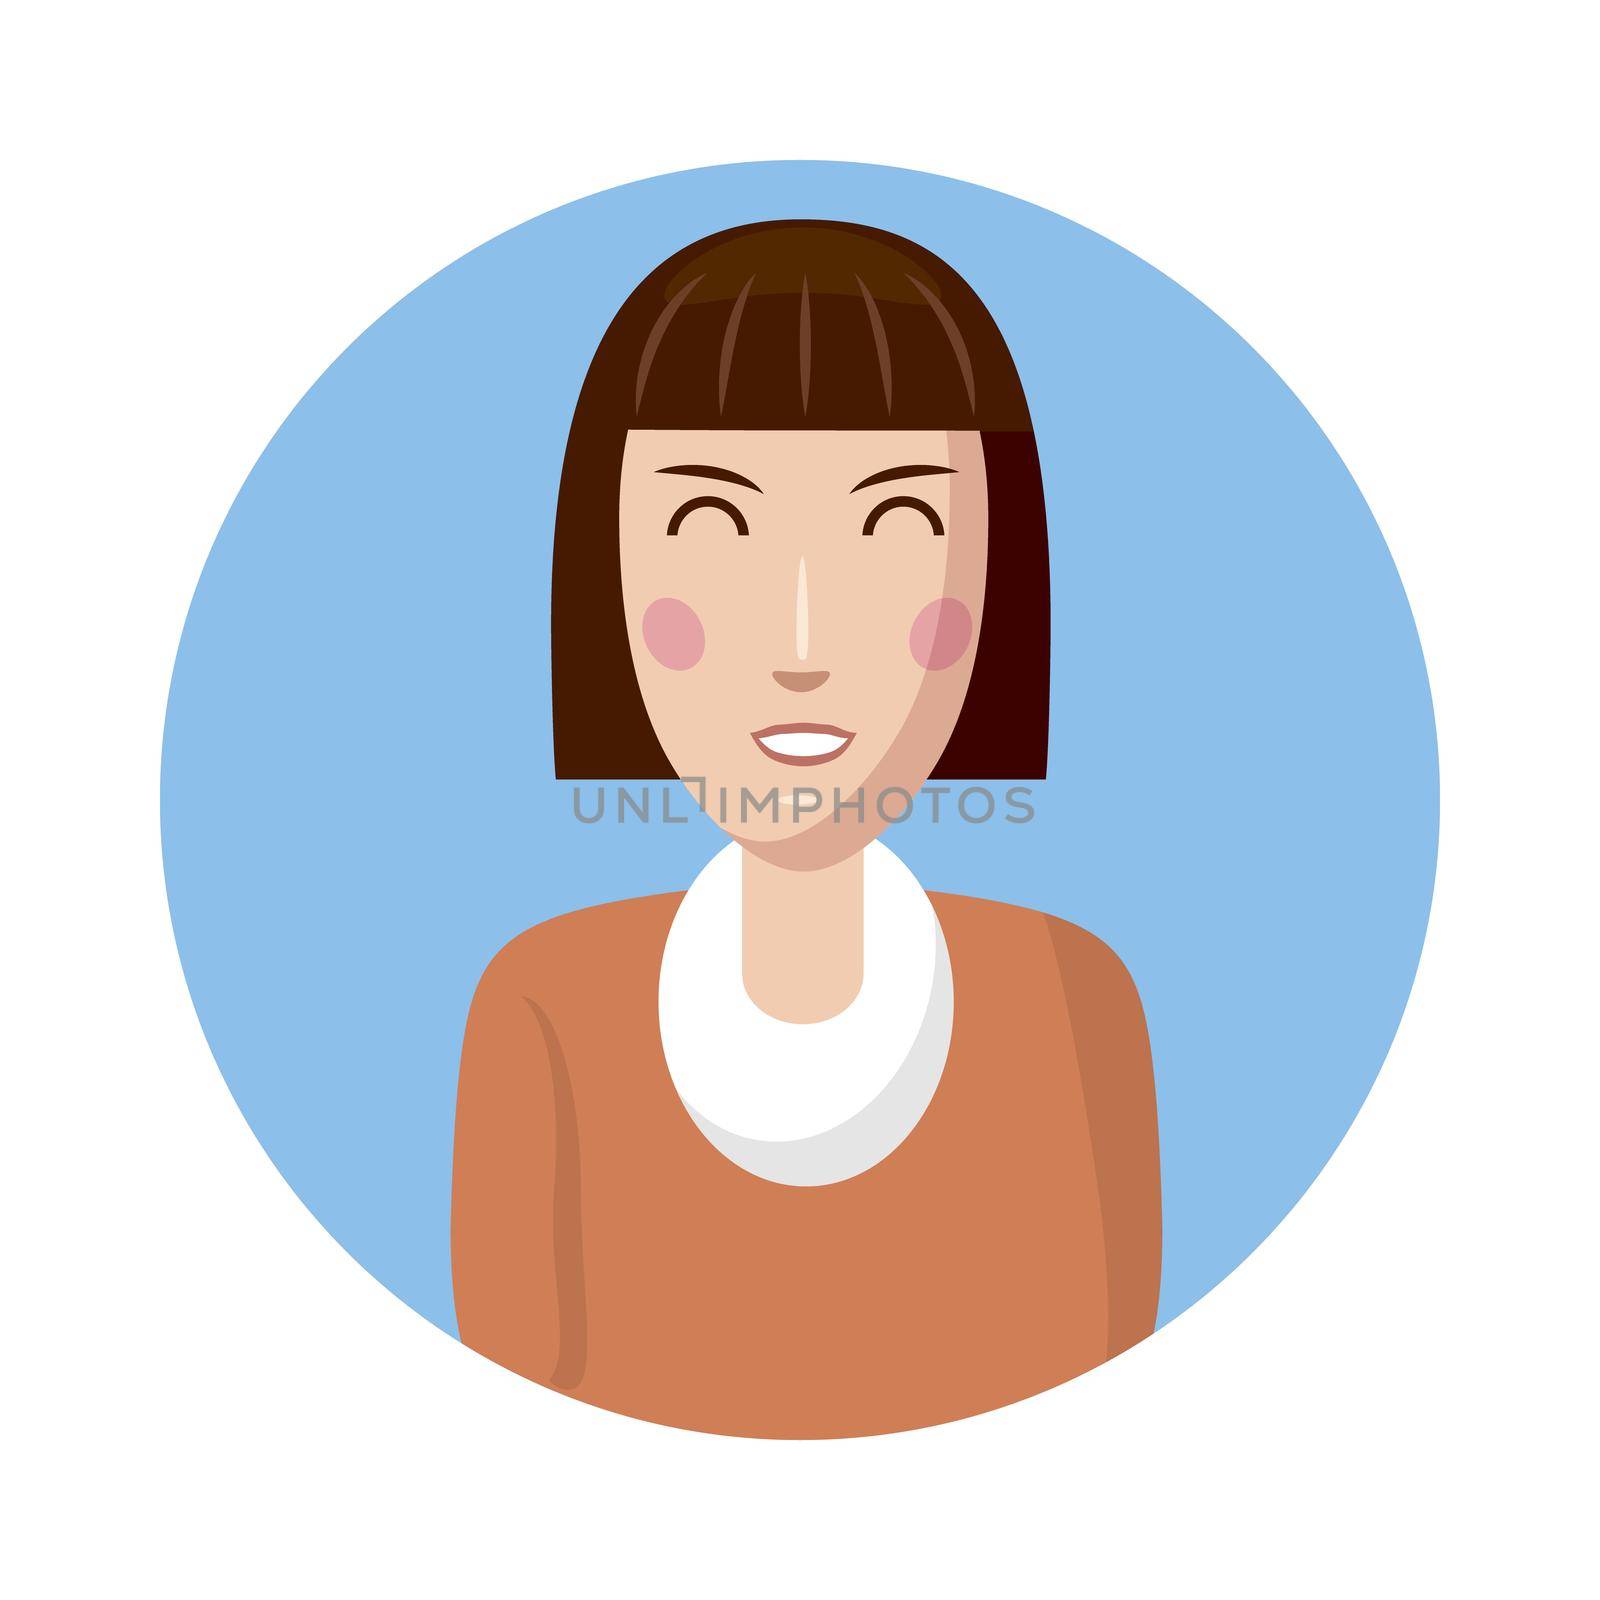 Woman avatar icon in cartoon style isolated on white background. White woman avatar profile picture